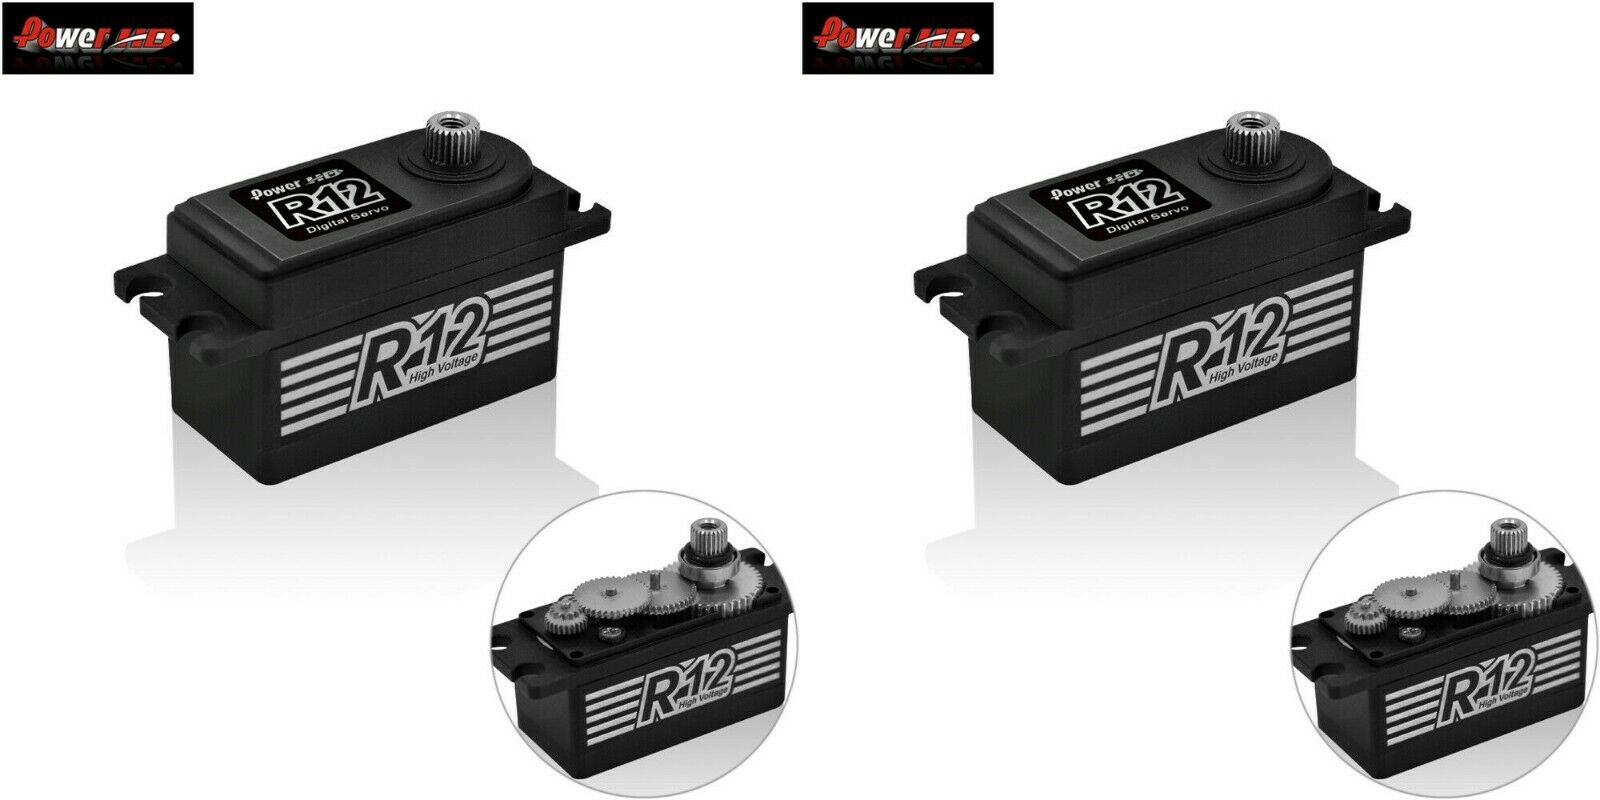 2X Power HD R12s 12KG 7.4V Digital Servo For 1:10 Buggy Touring RC Cars On Road